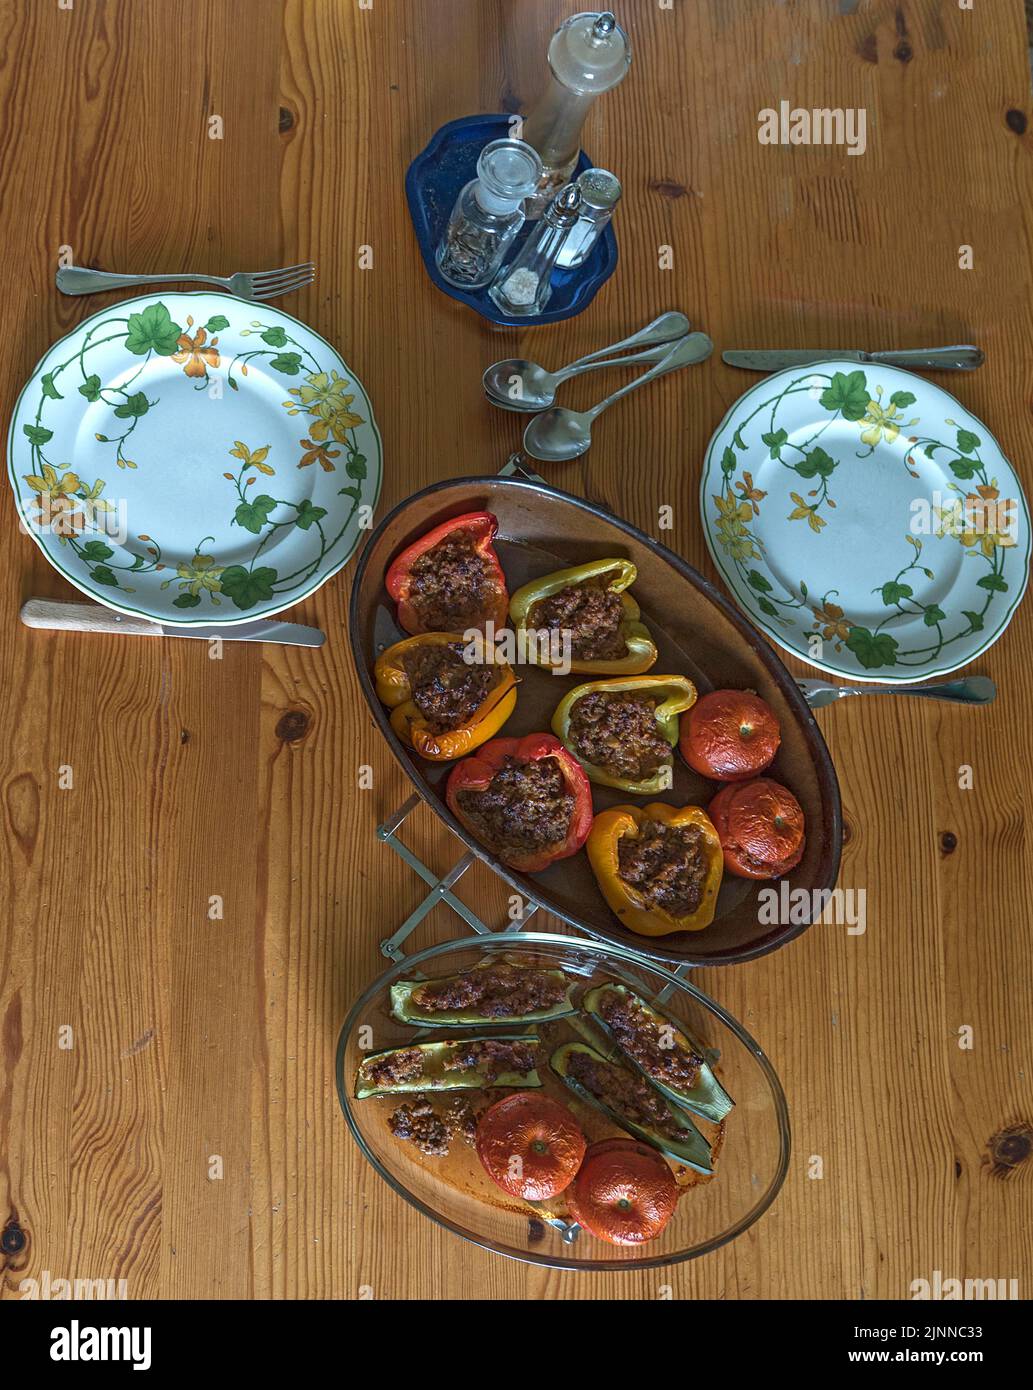 Stuffed peppers and tomatoes in two casseroles on the dining table, Bavaria, Germany Stock Photo